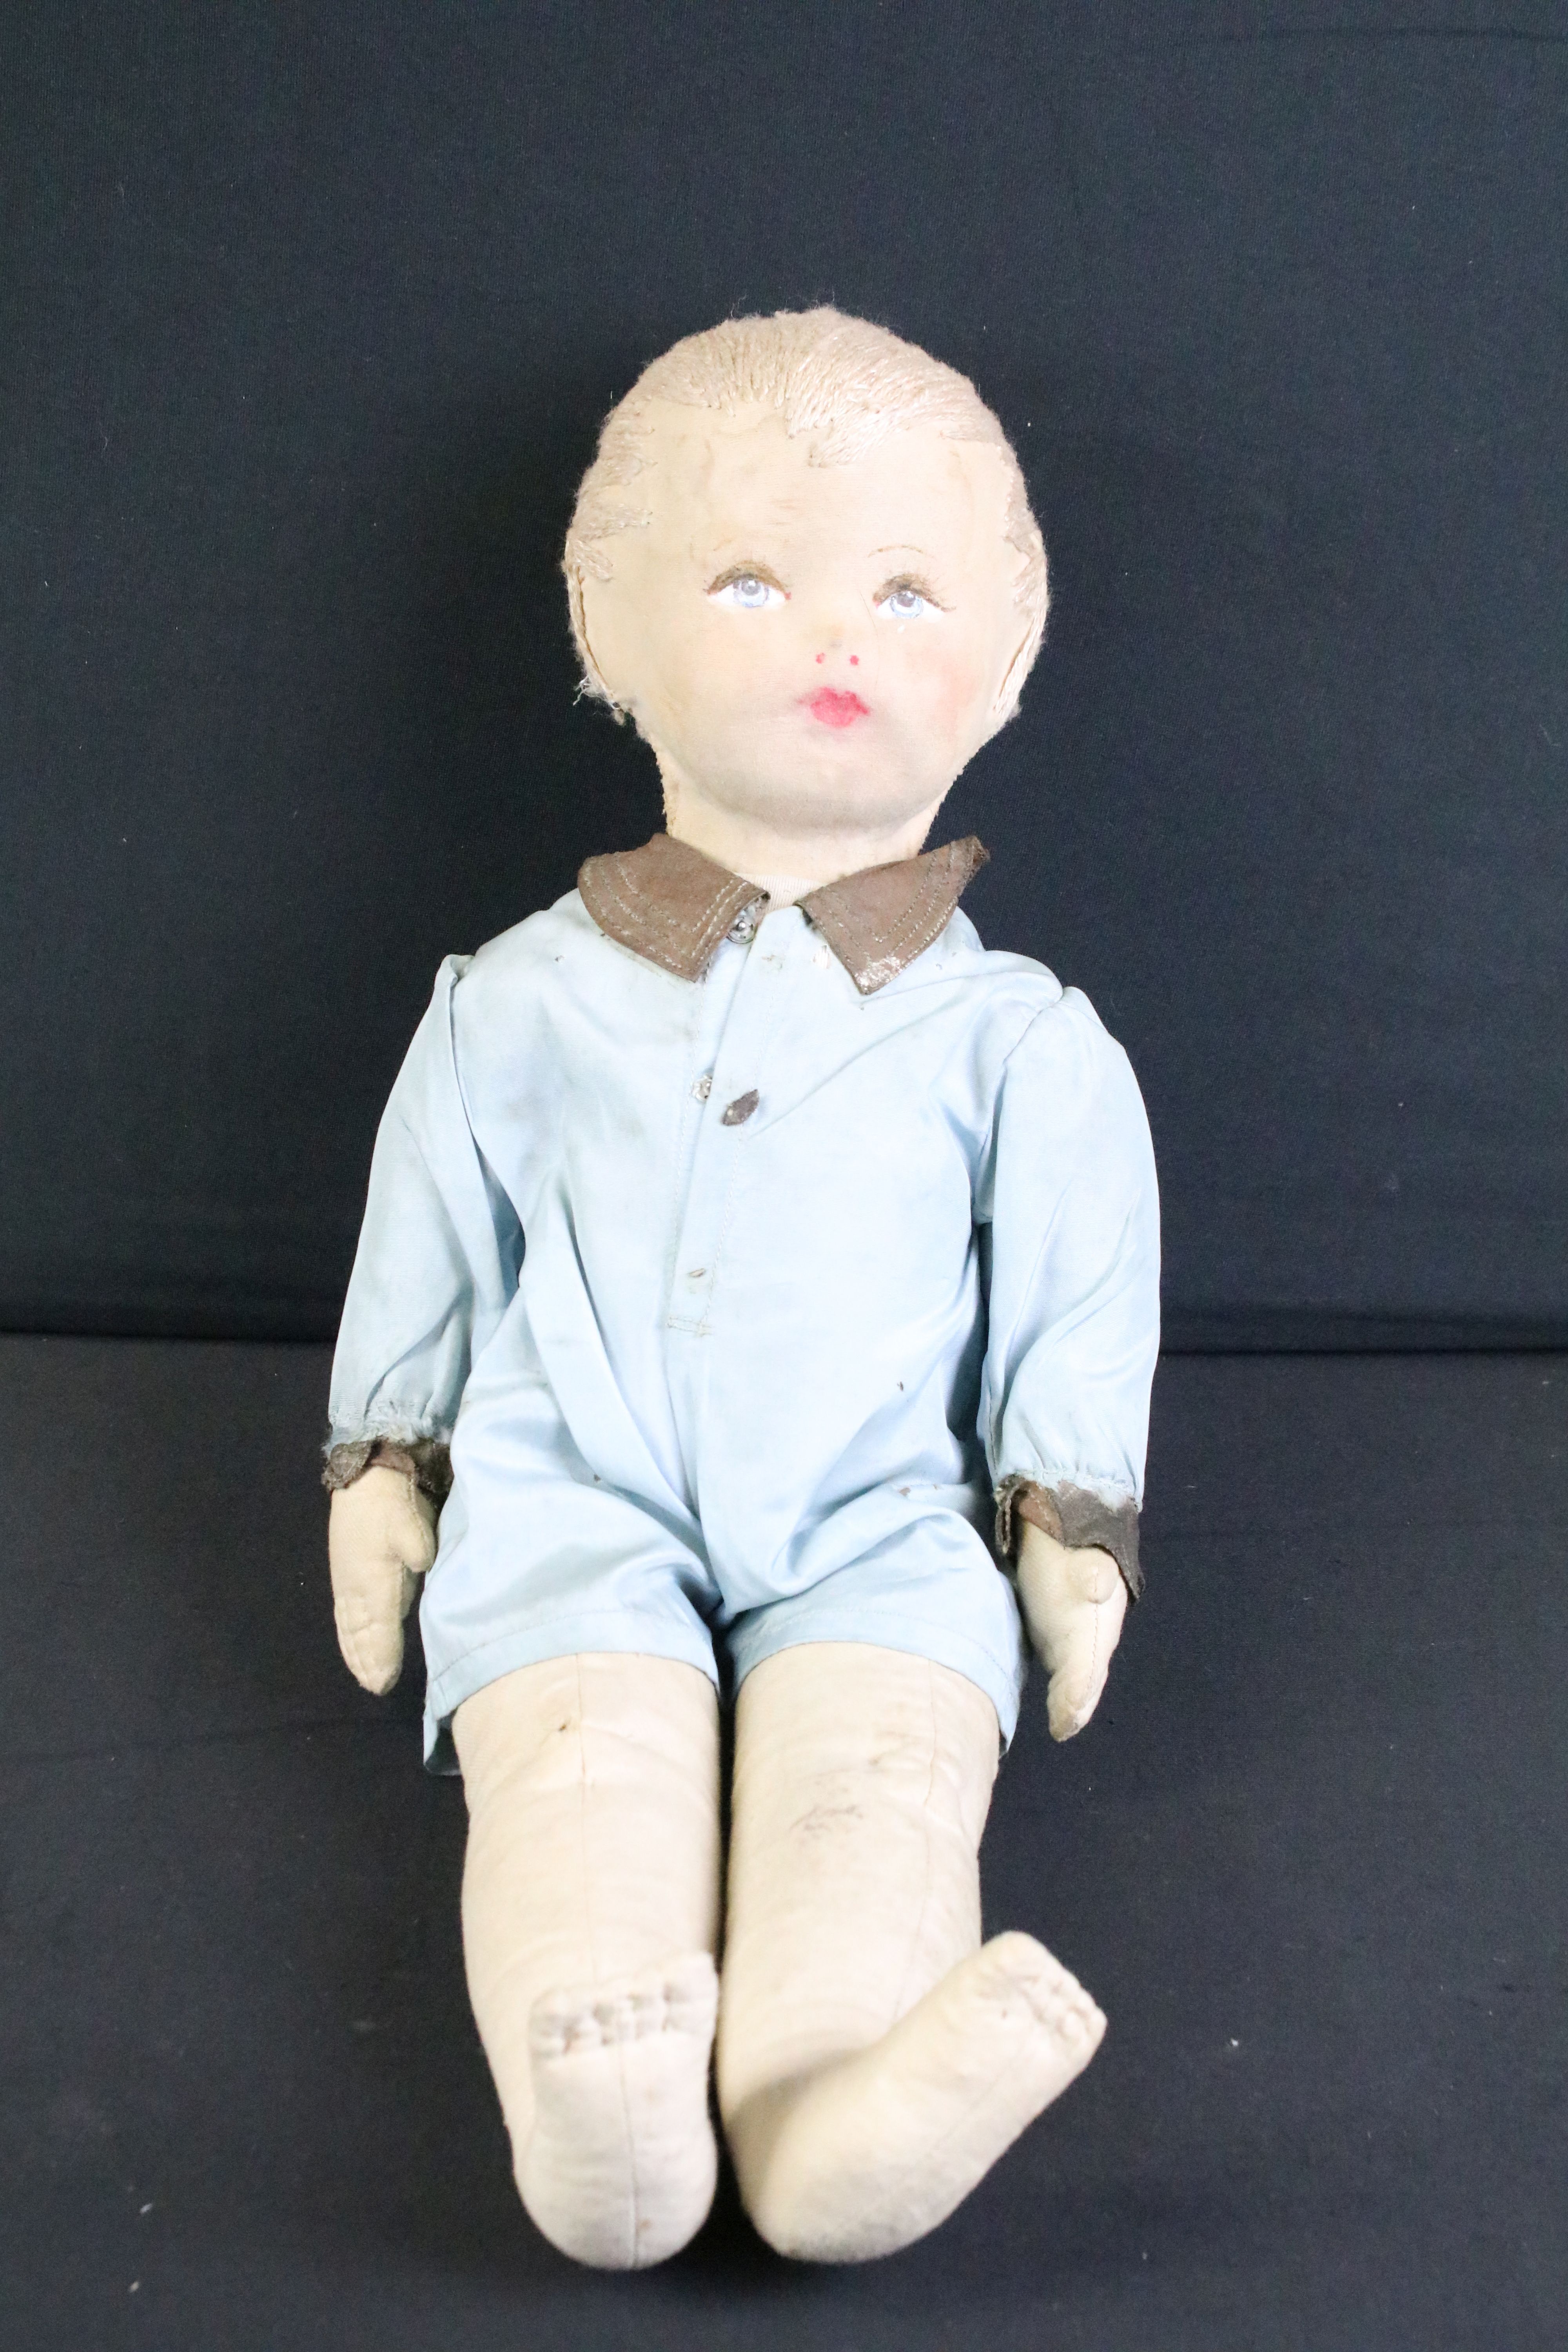 Pair of mid 20th C cloth covered dolls, clothed, with painted facial features and sewn hair. - Image 2 of 7